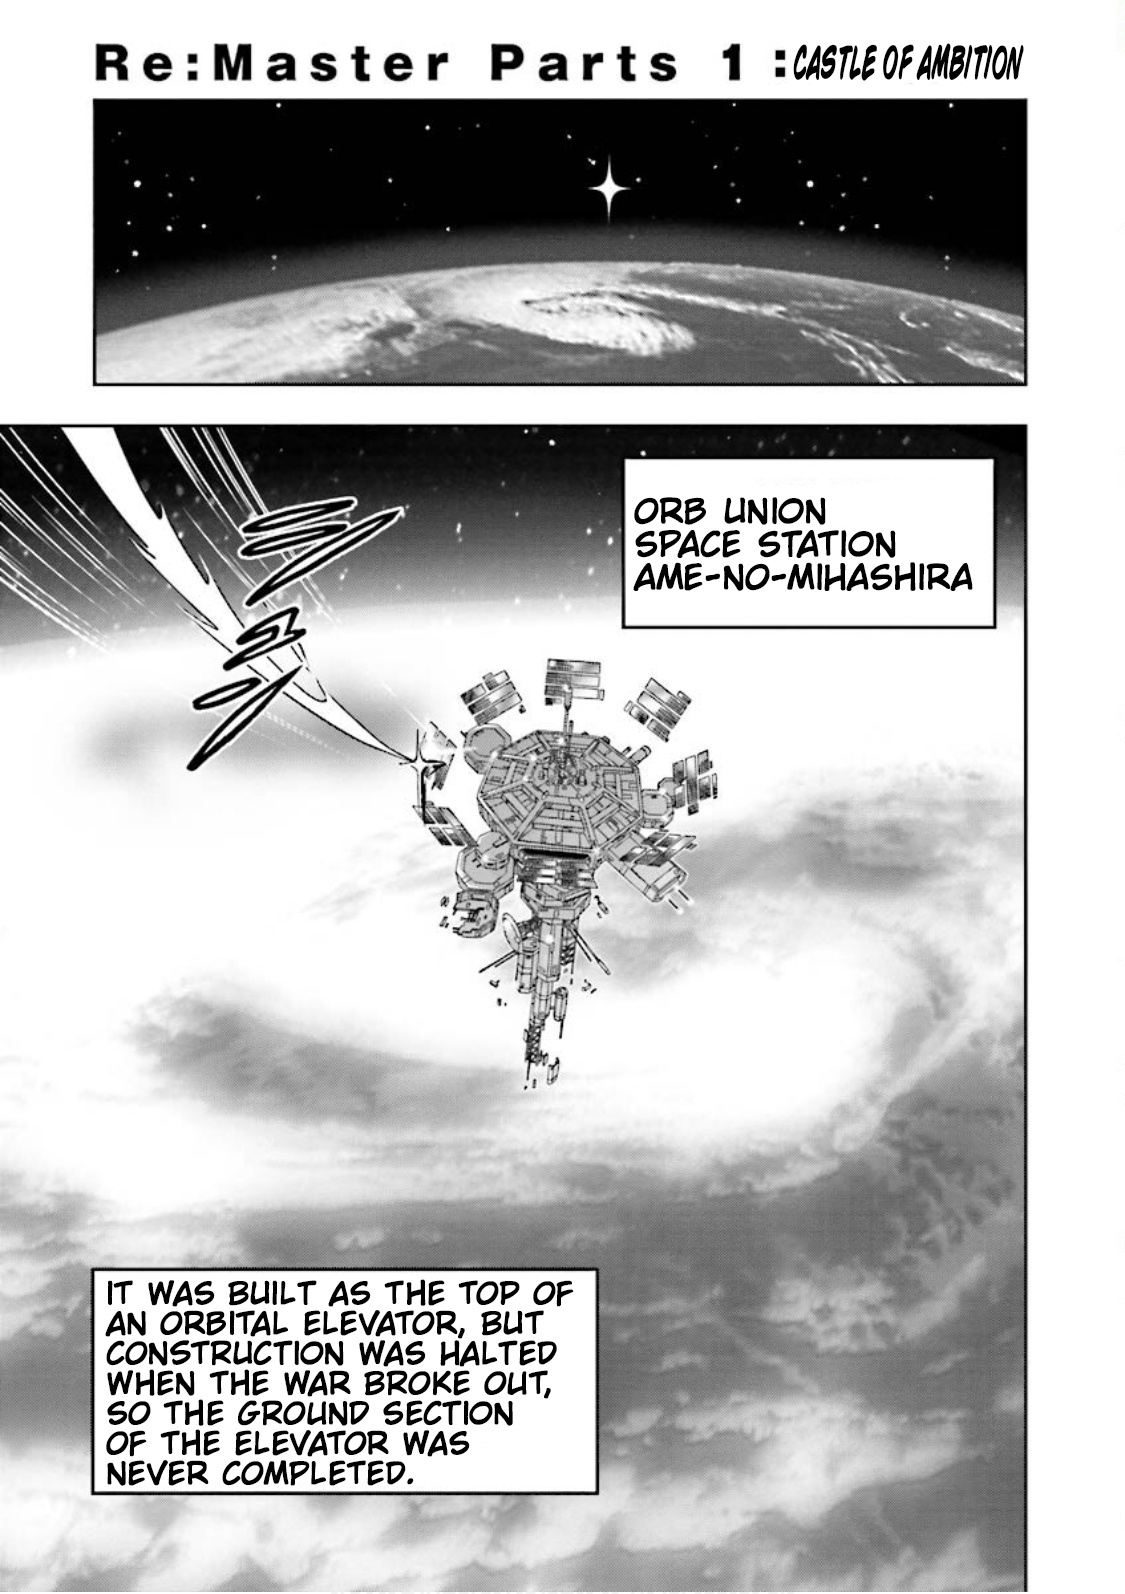 Mobile Suit Gundam Seed Astray Re:master Edition Chapter 5.5 #1